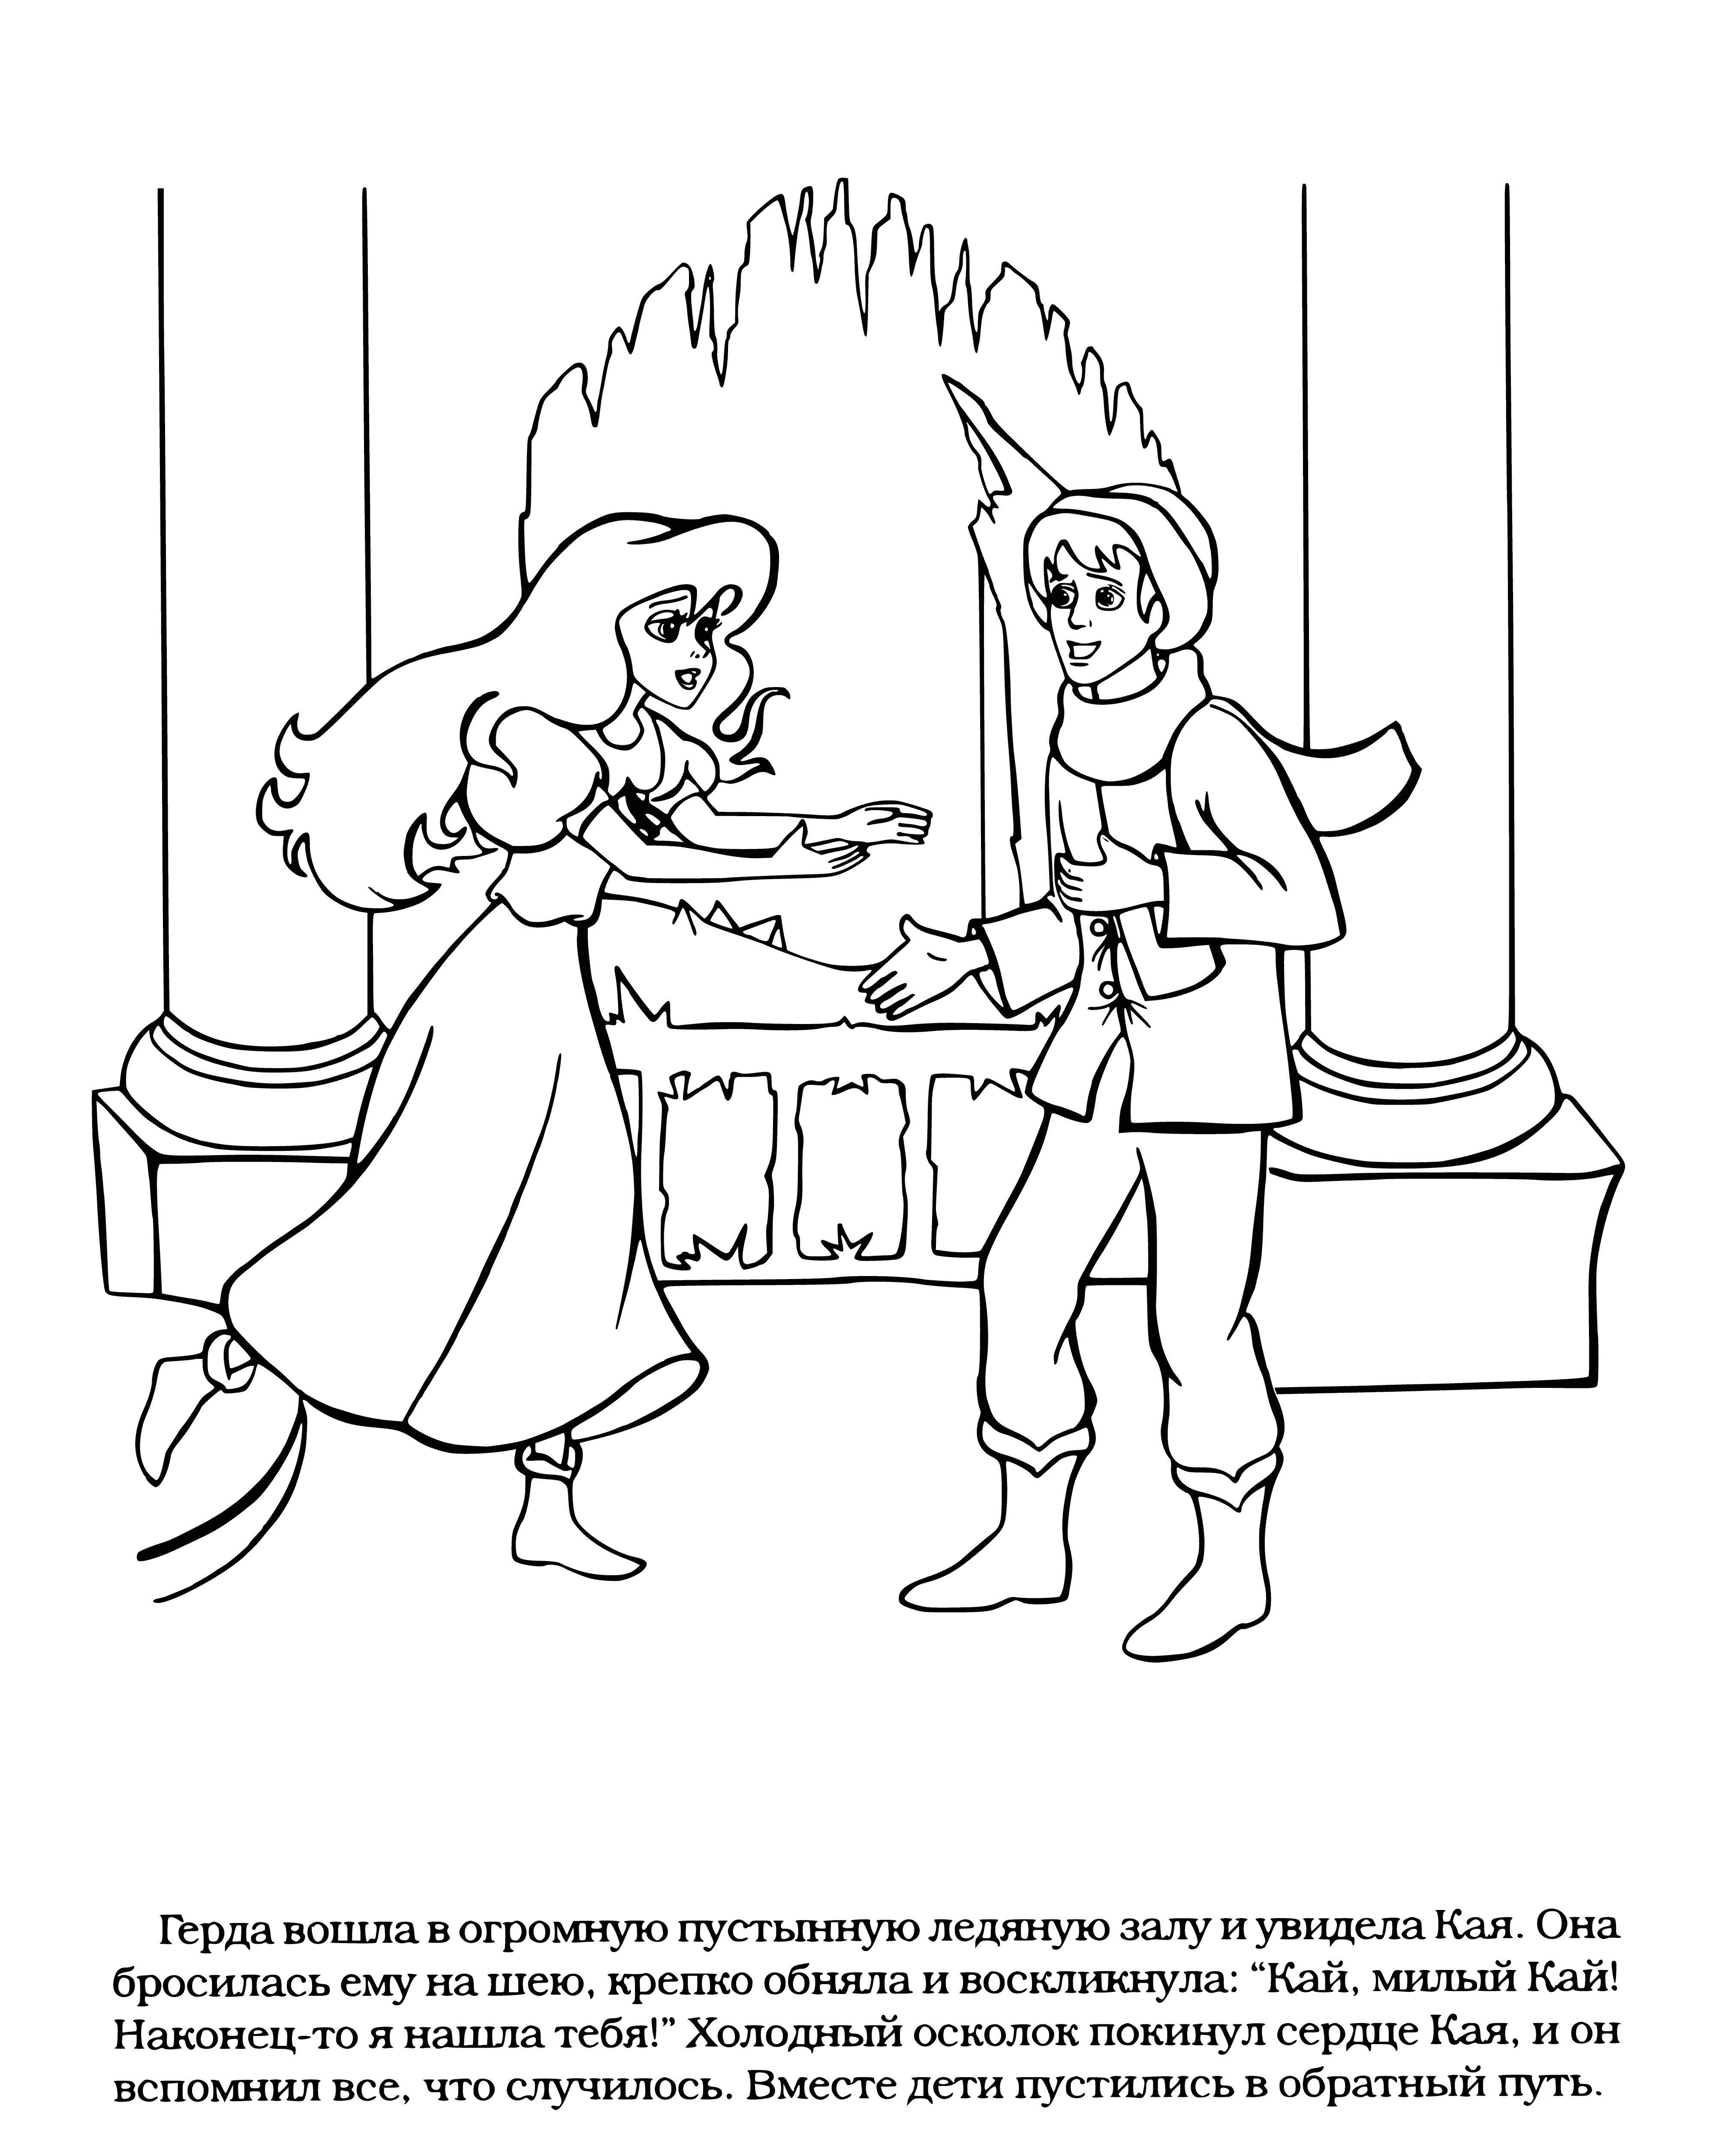 coloring page: Kai and Gerda both kids, standing side-by-side looking out a window with blonde hair.